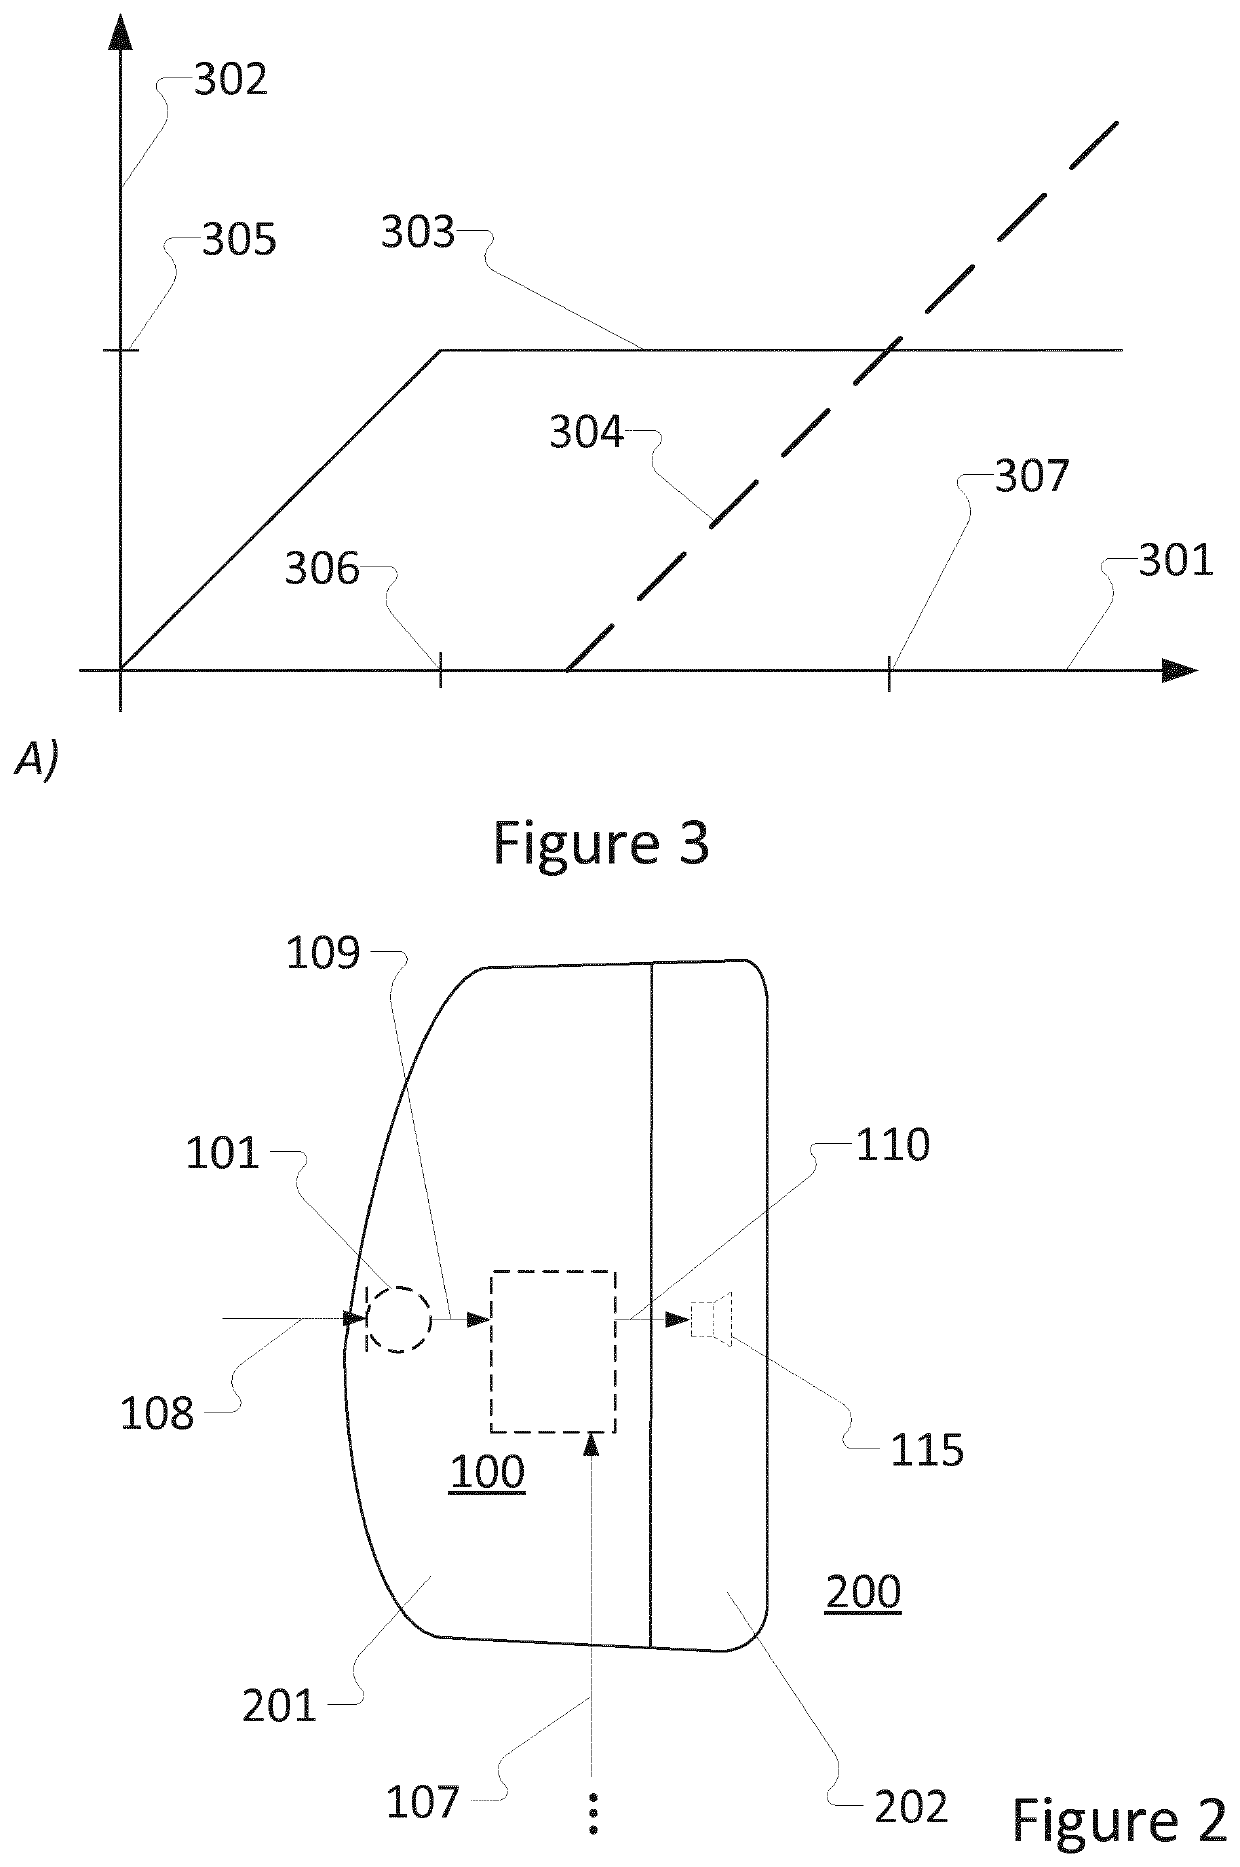 An audio device with adaptive auto-gain